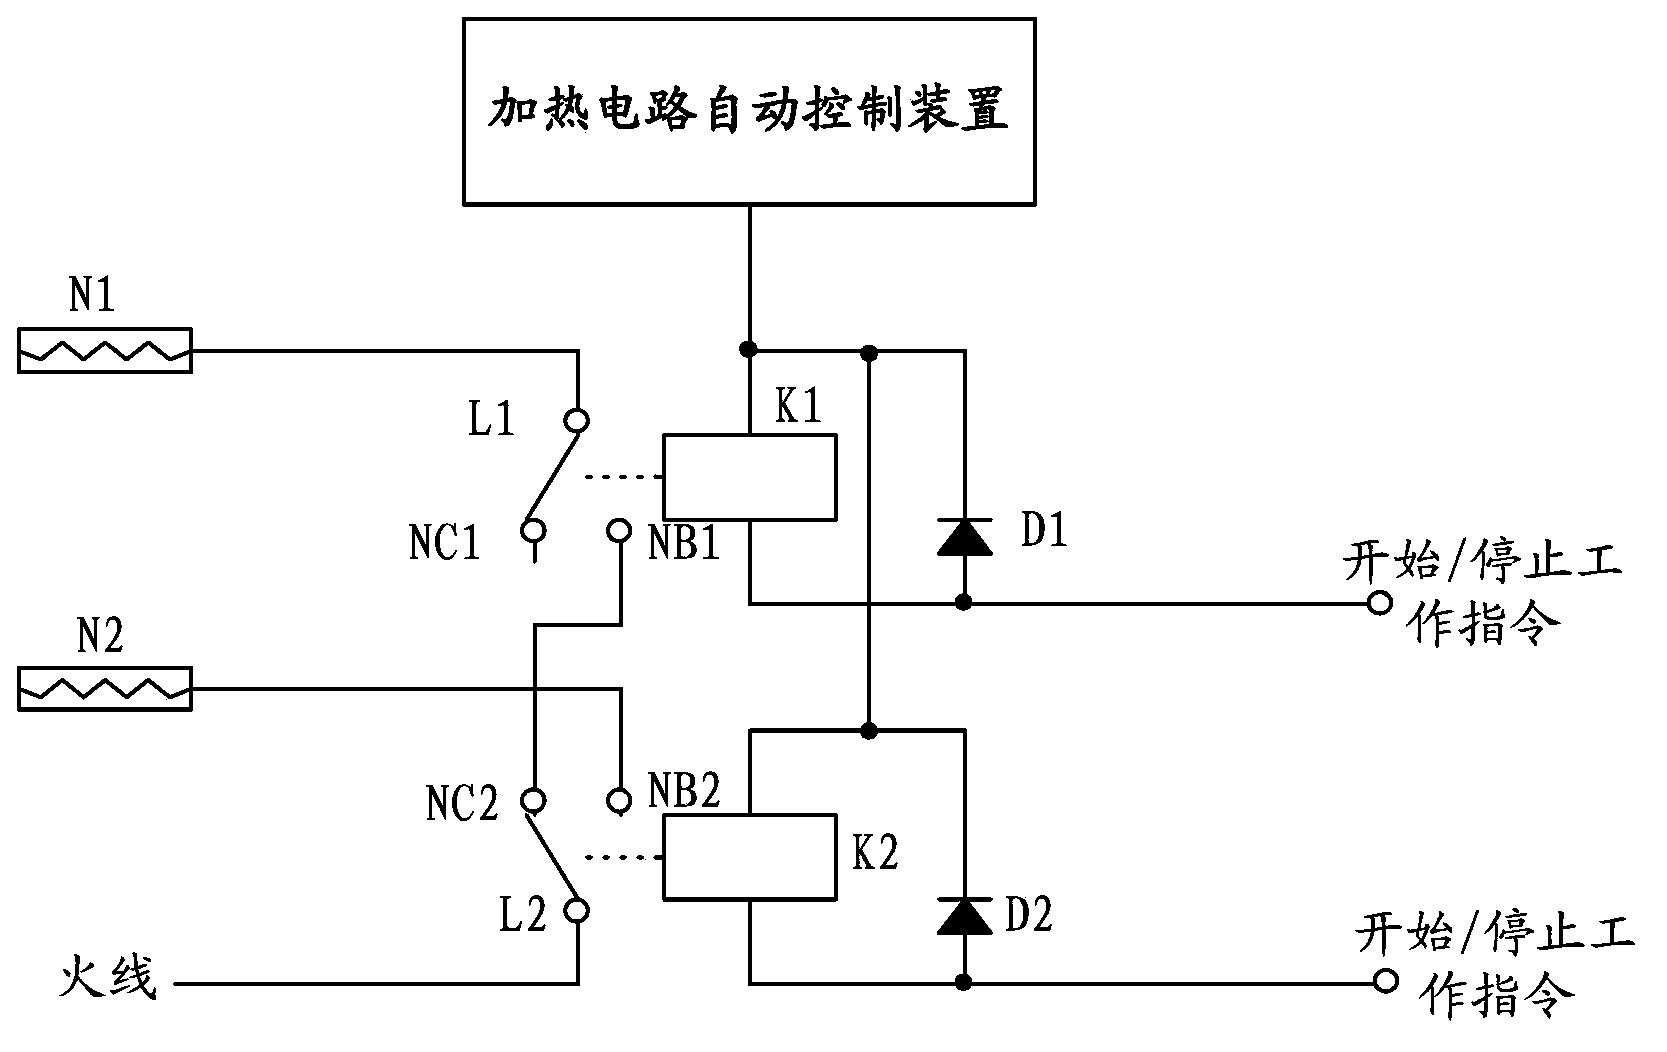 Method and device for automatically controlling heating circuits and washing machine